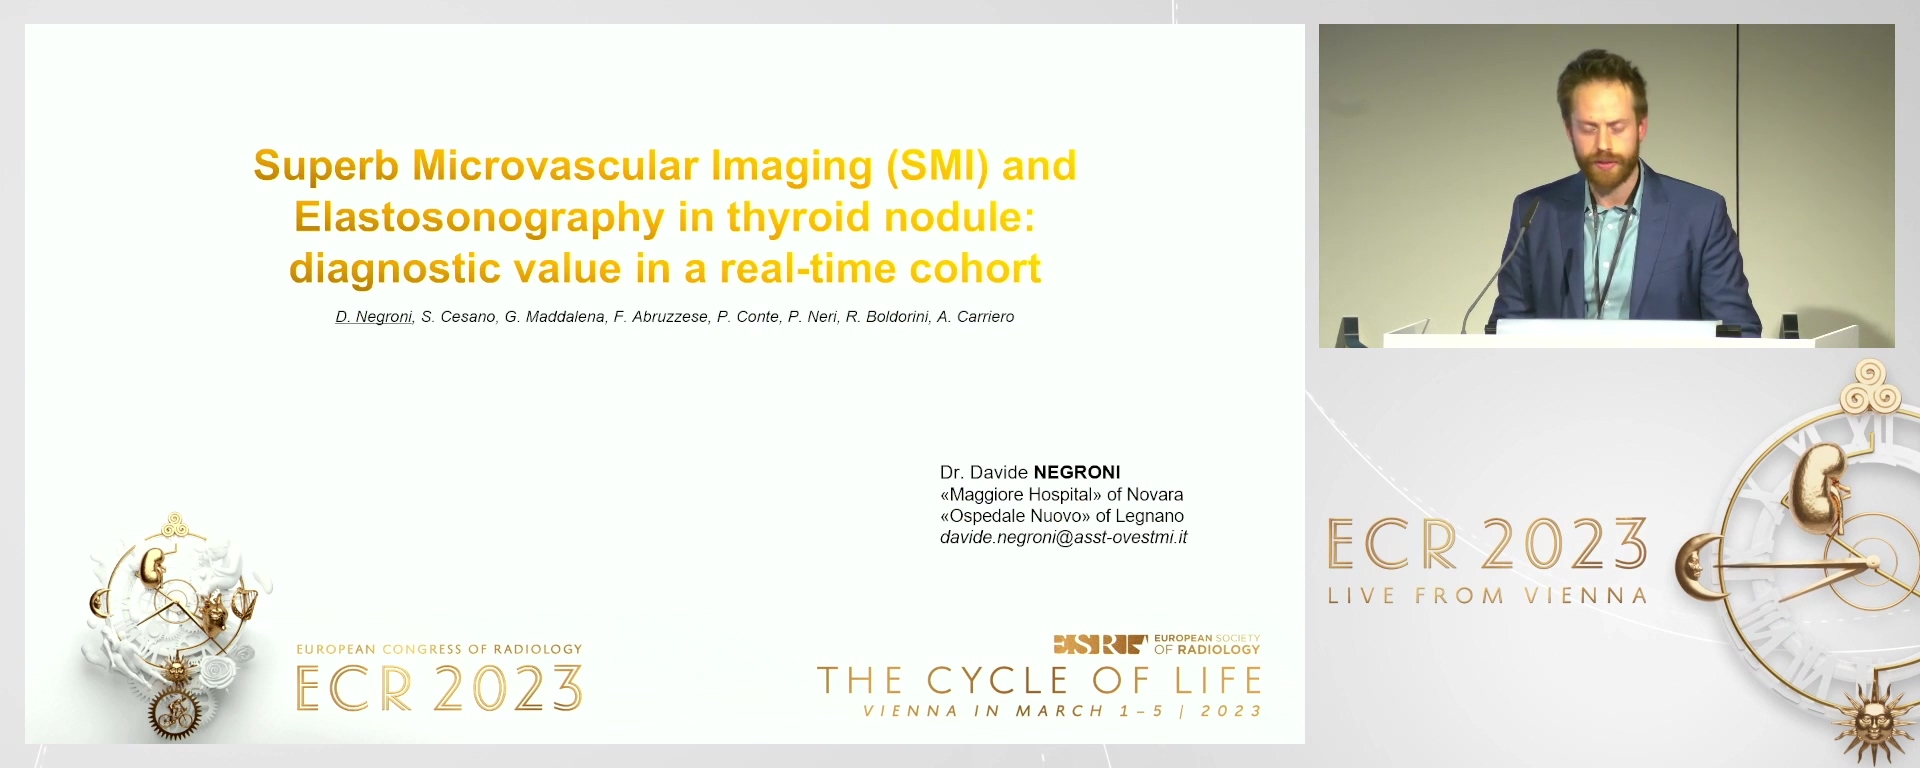 Superb microvascular imaging (SMI) and elastosonography in thyroid nodule: diagnostic value in a real-time cohort - Davide  Negroni, Galliate / IT